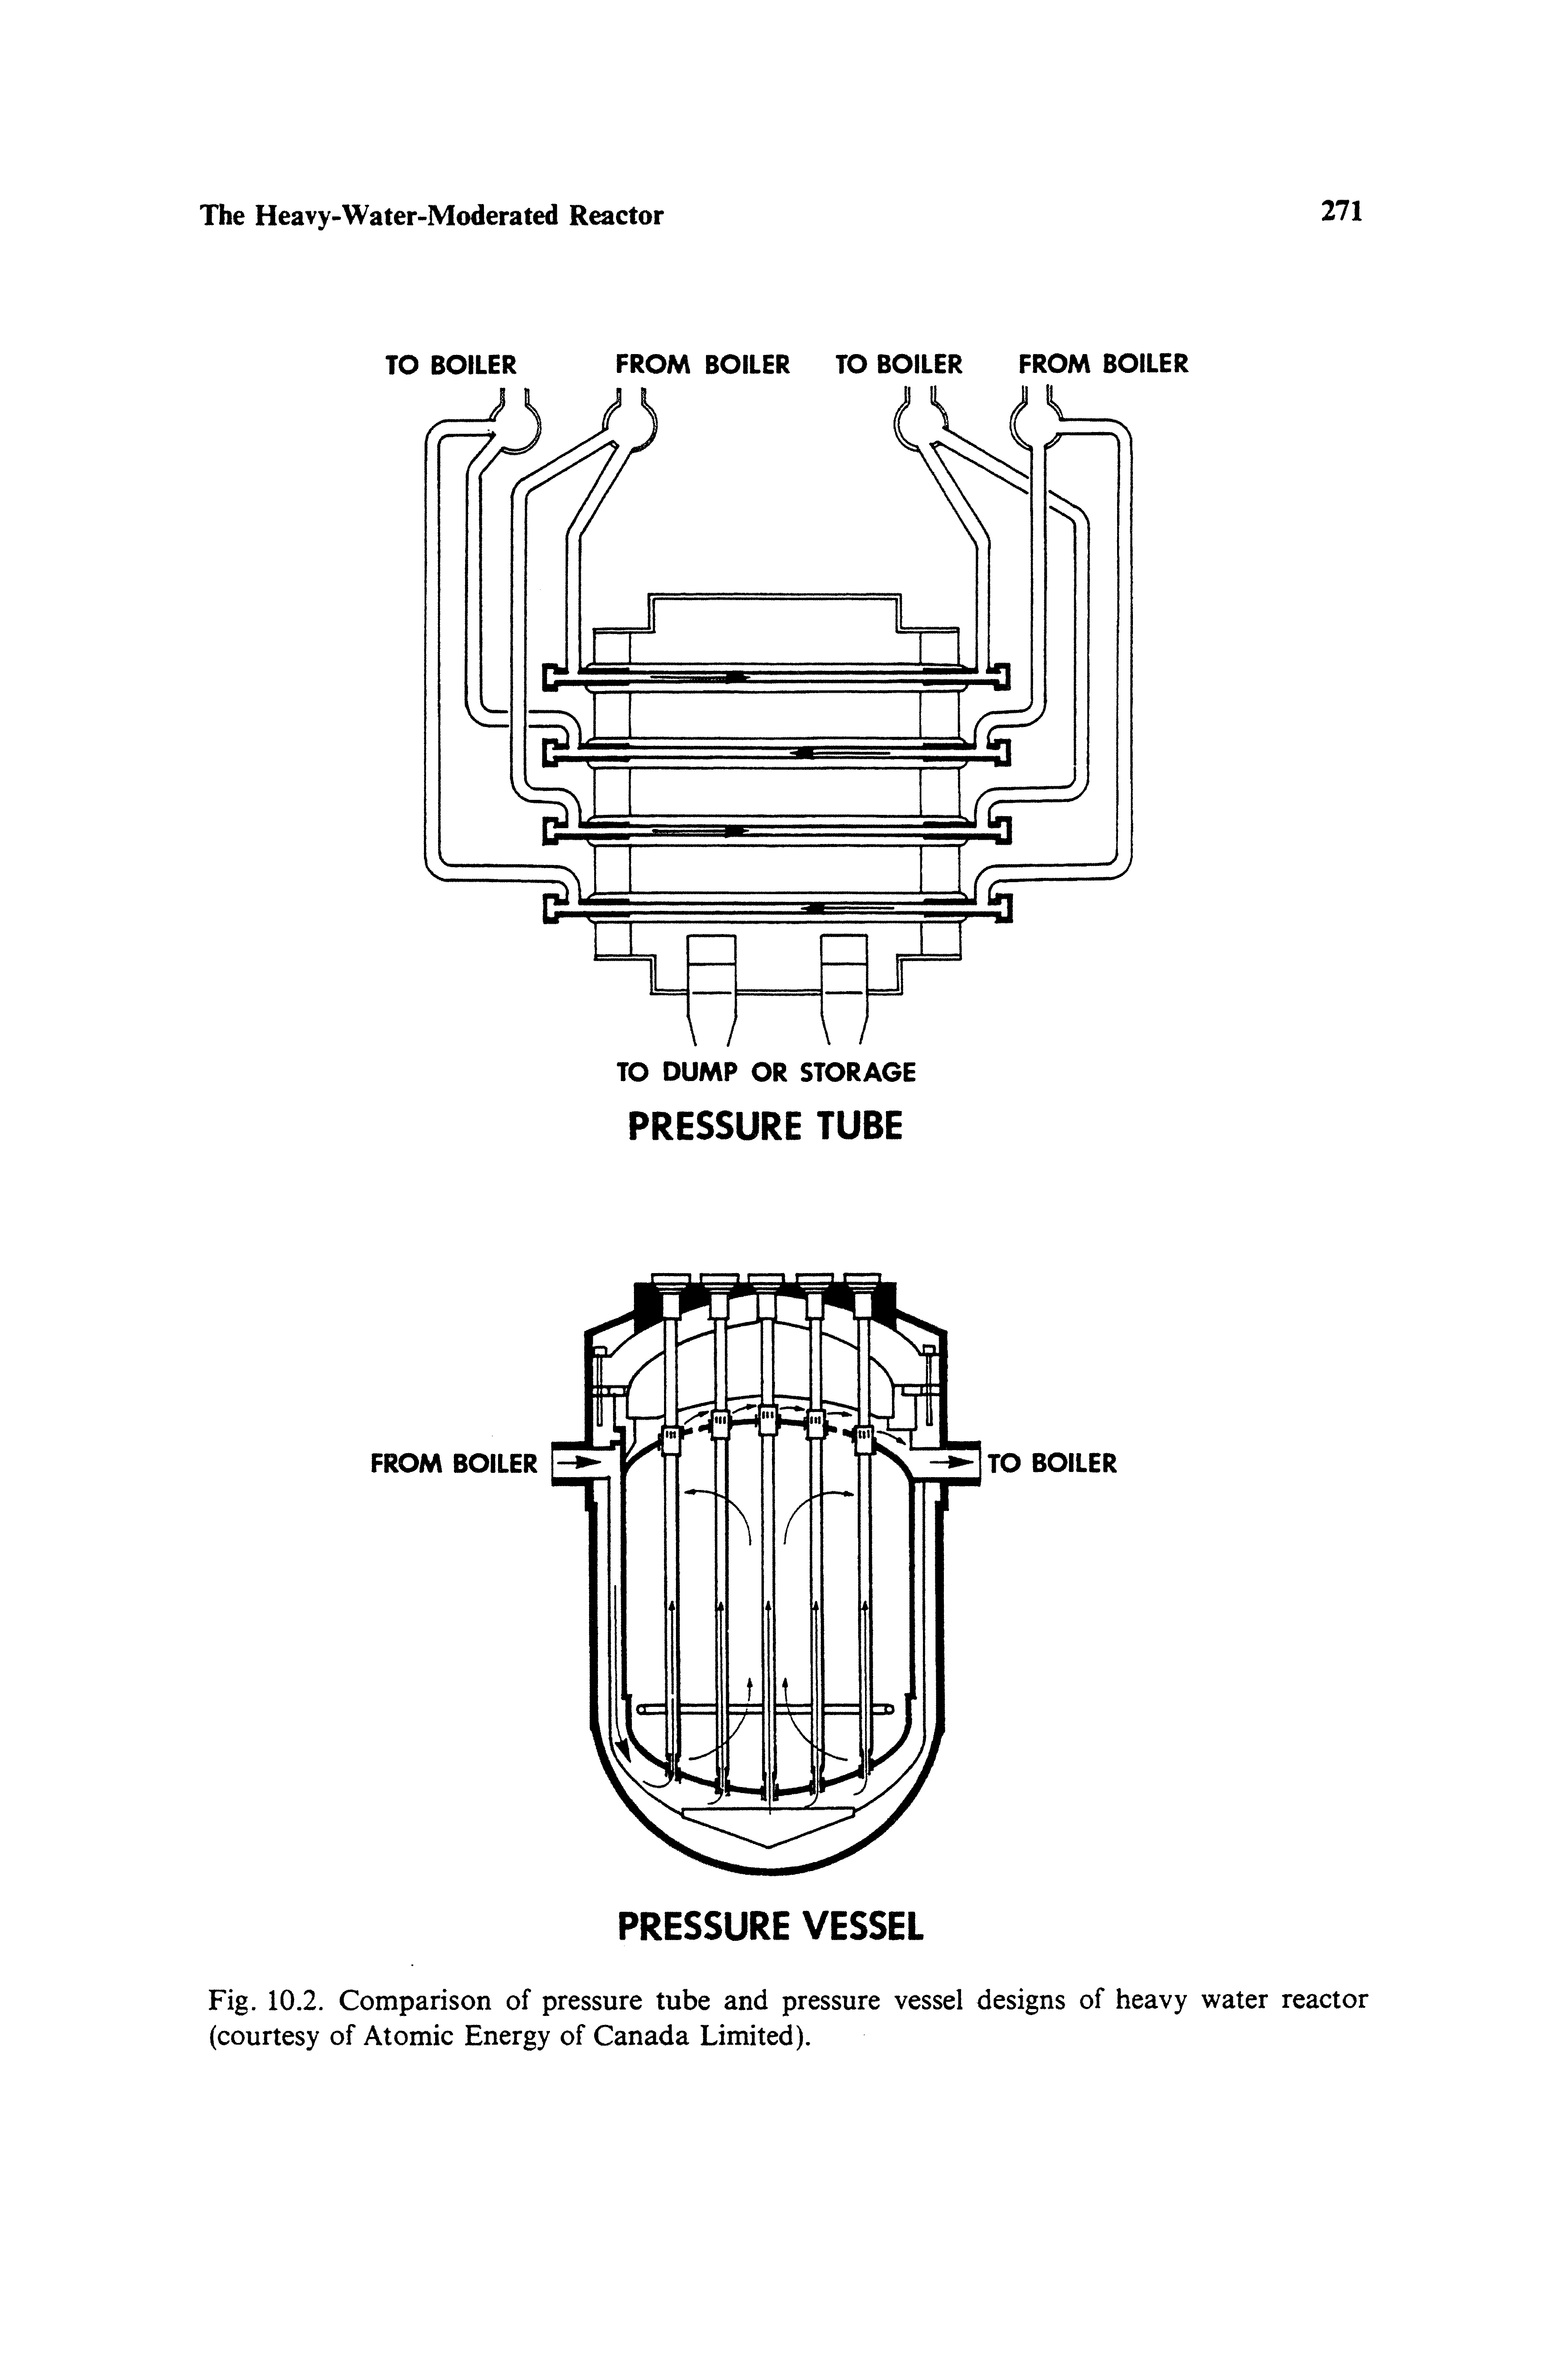 Fig. 10.2. Comparison of pressure tube and pressure vessel designs of heavy water reactor (courtesy of Atomic Energy of Canada Limited).